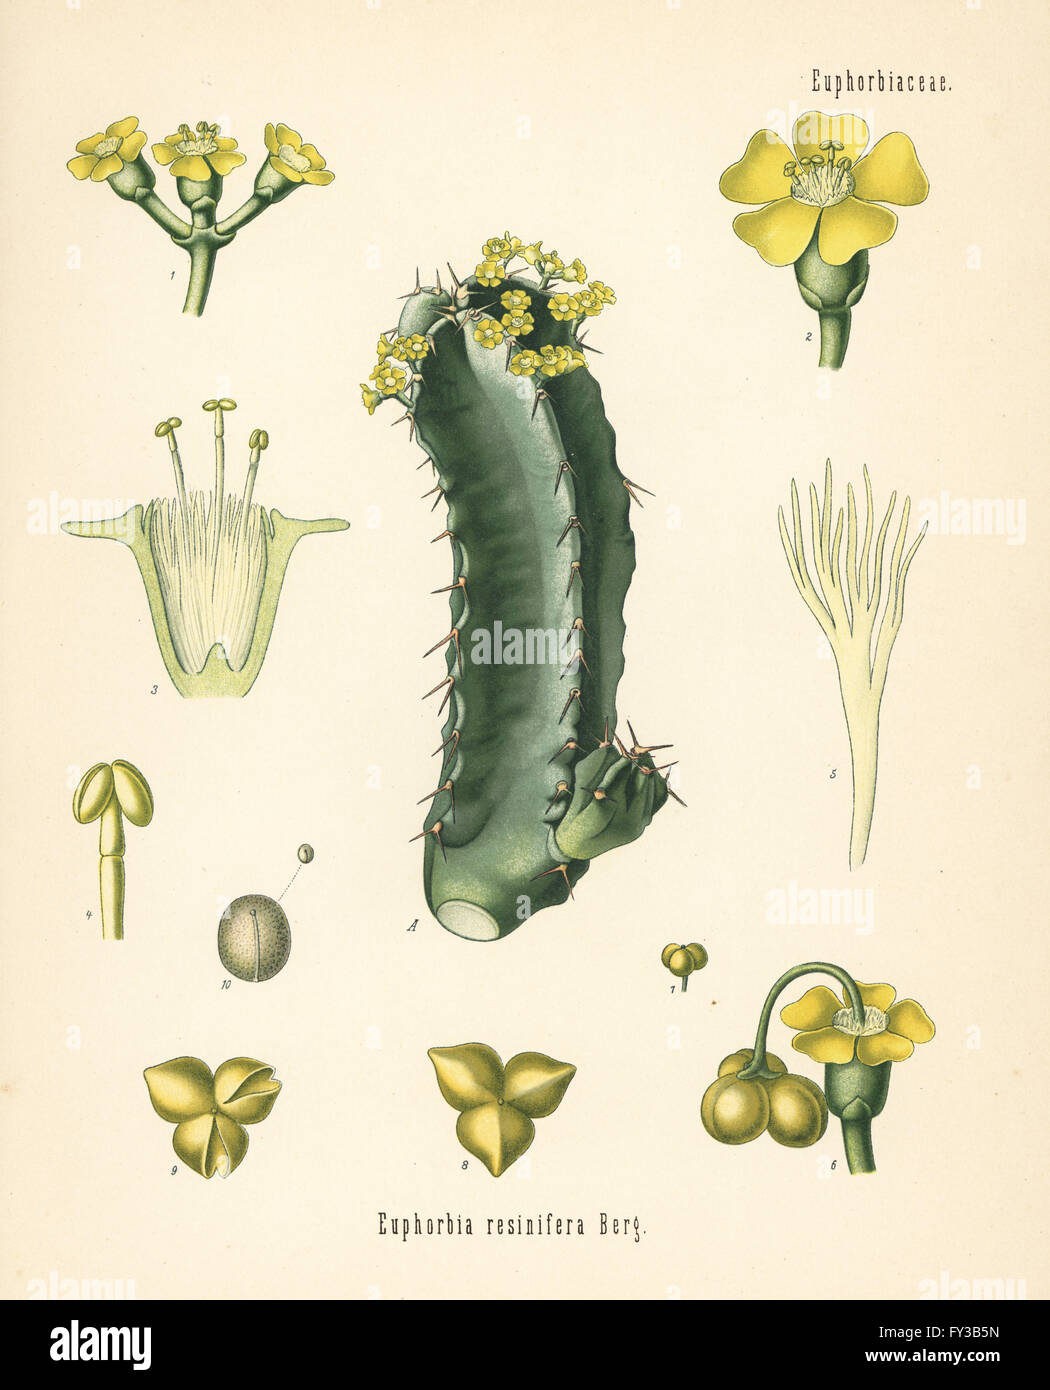 Resin spurge, Euphorbia resinifera. Chromolithograph after a botanical illustration from Hermann Adolph Koehler's Medicinal Plants, edited by Gustav Pabst, Koehler, Germany, 1887. Stock Photo